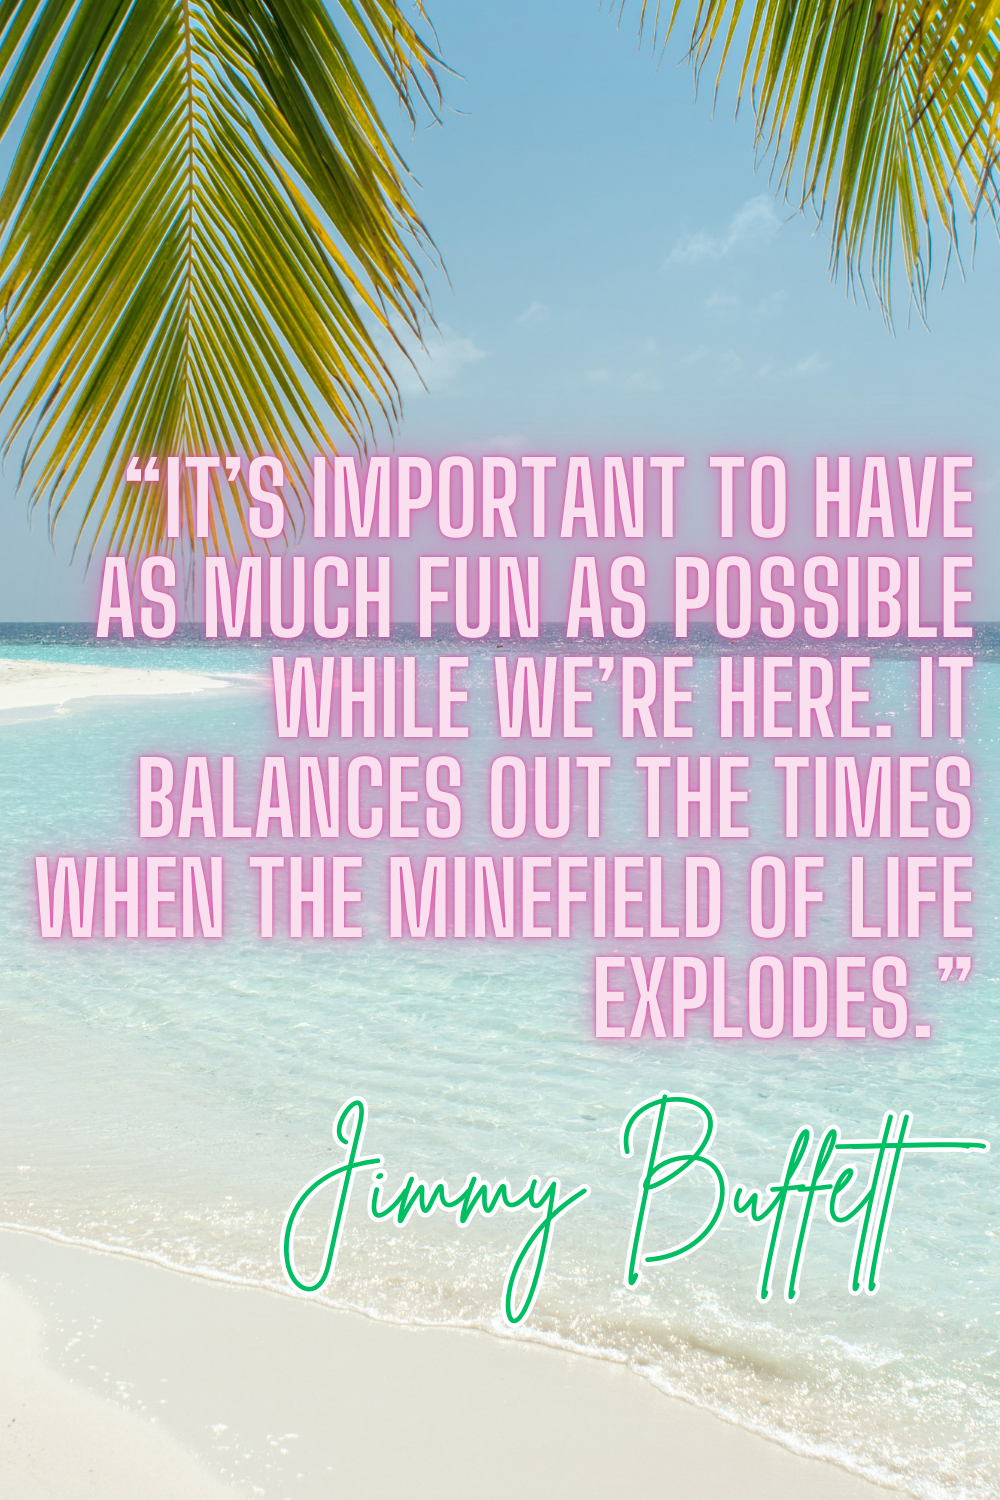 Jimmy Buffet Quotes